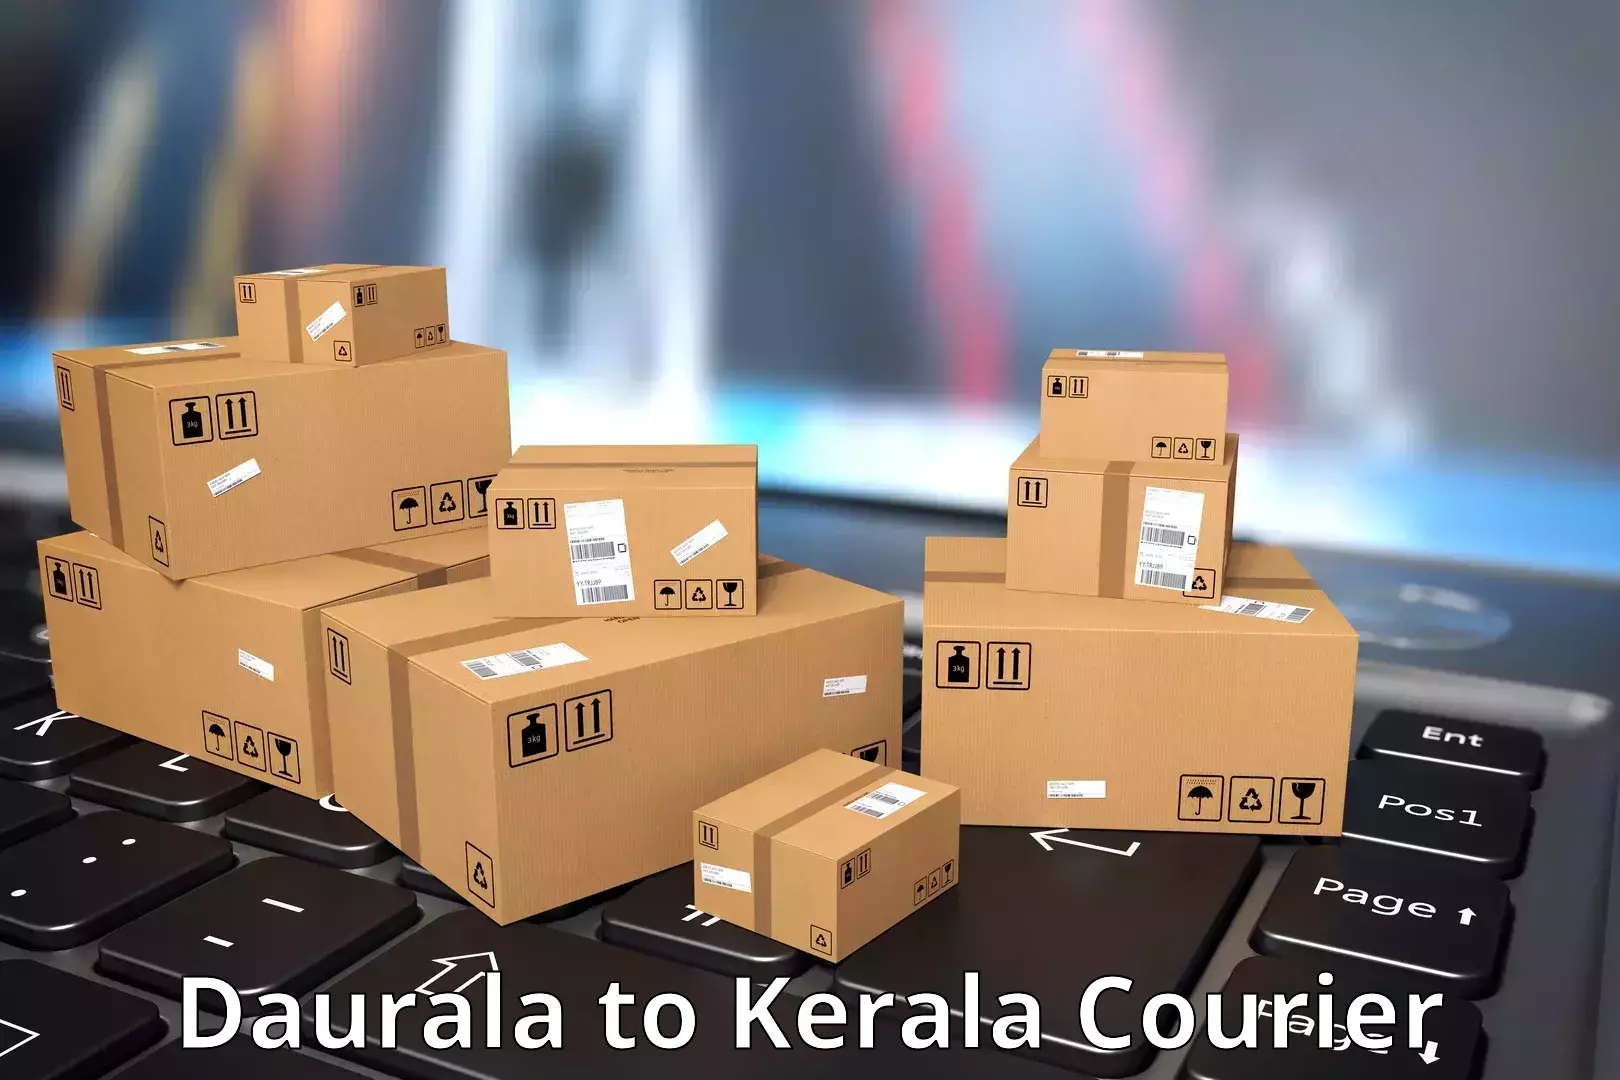 Parcel service for businesses Daurala to Valanchery